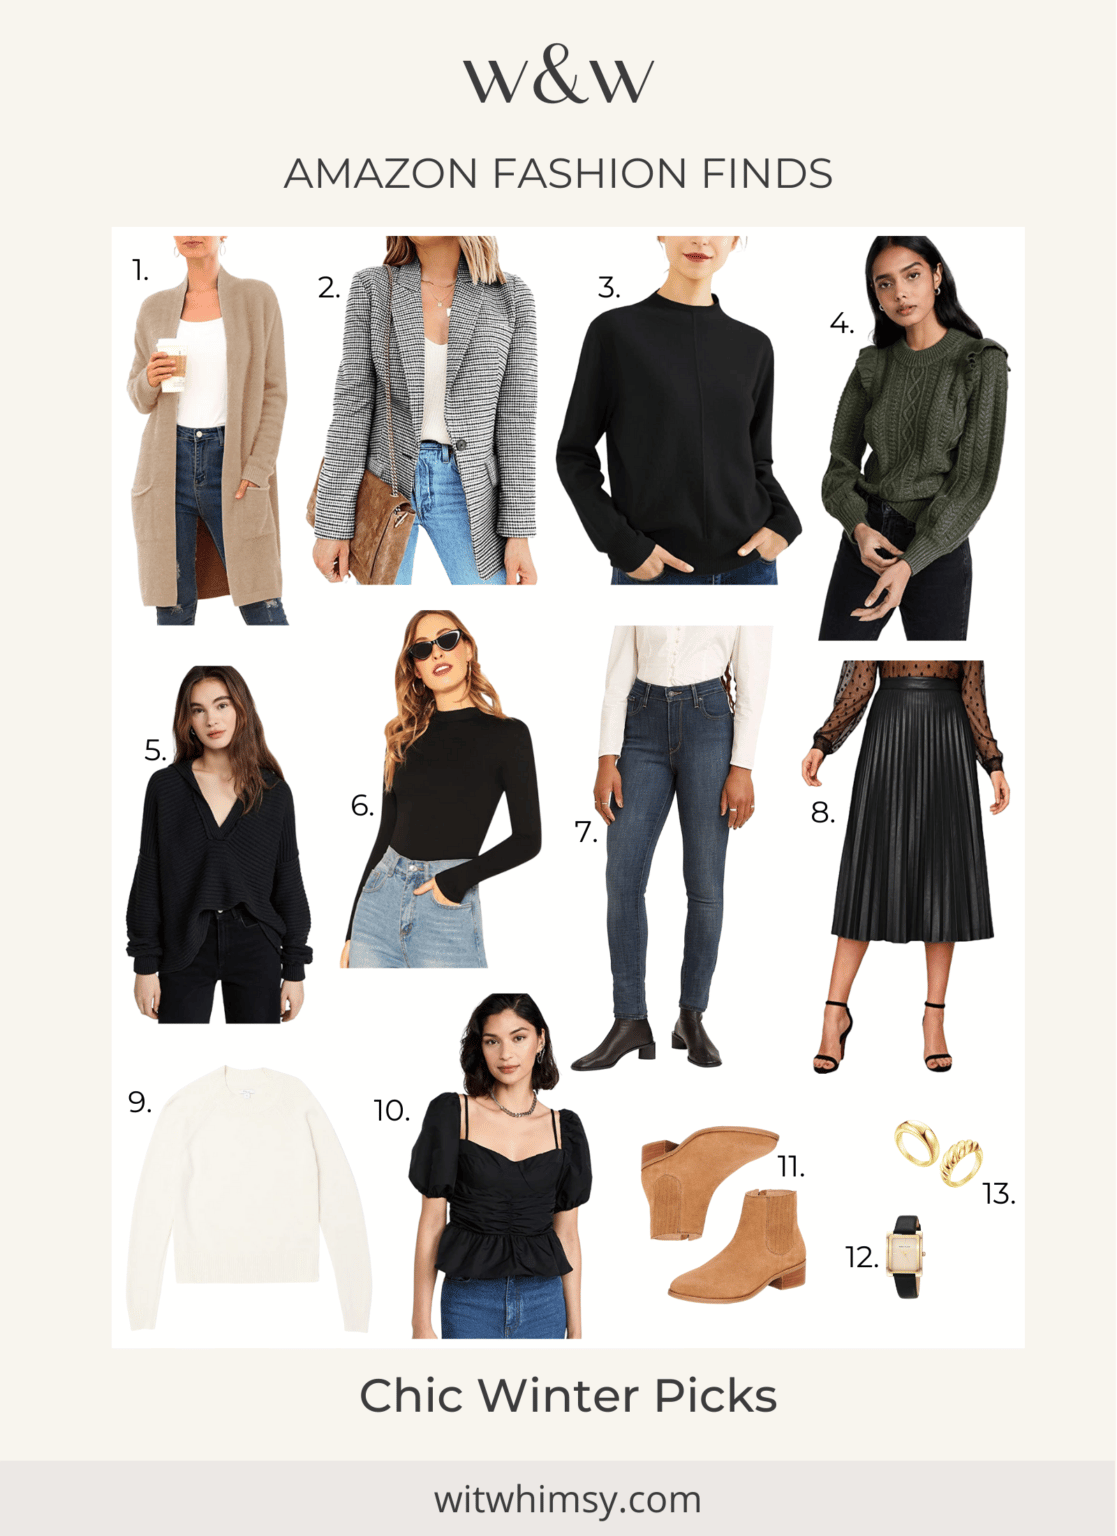 Chic Winter Picks from Amazon Fashion - wit & whimsy